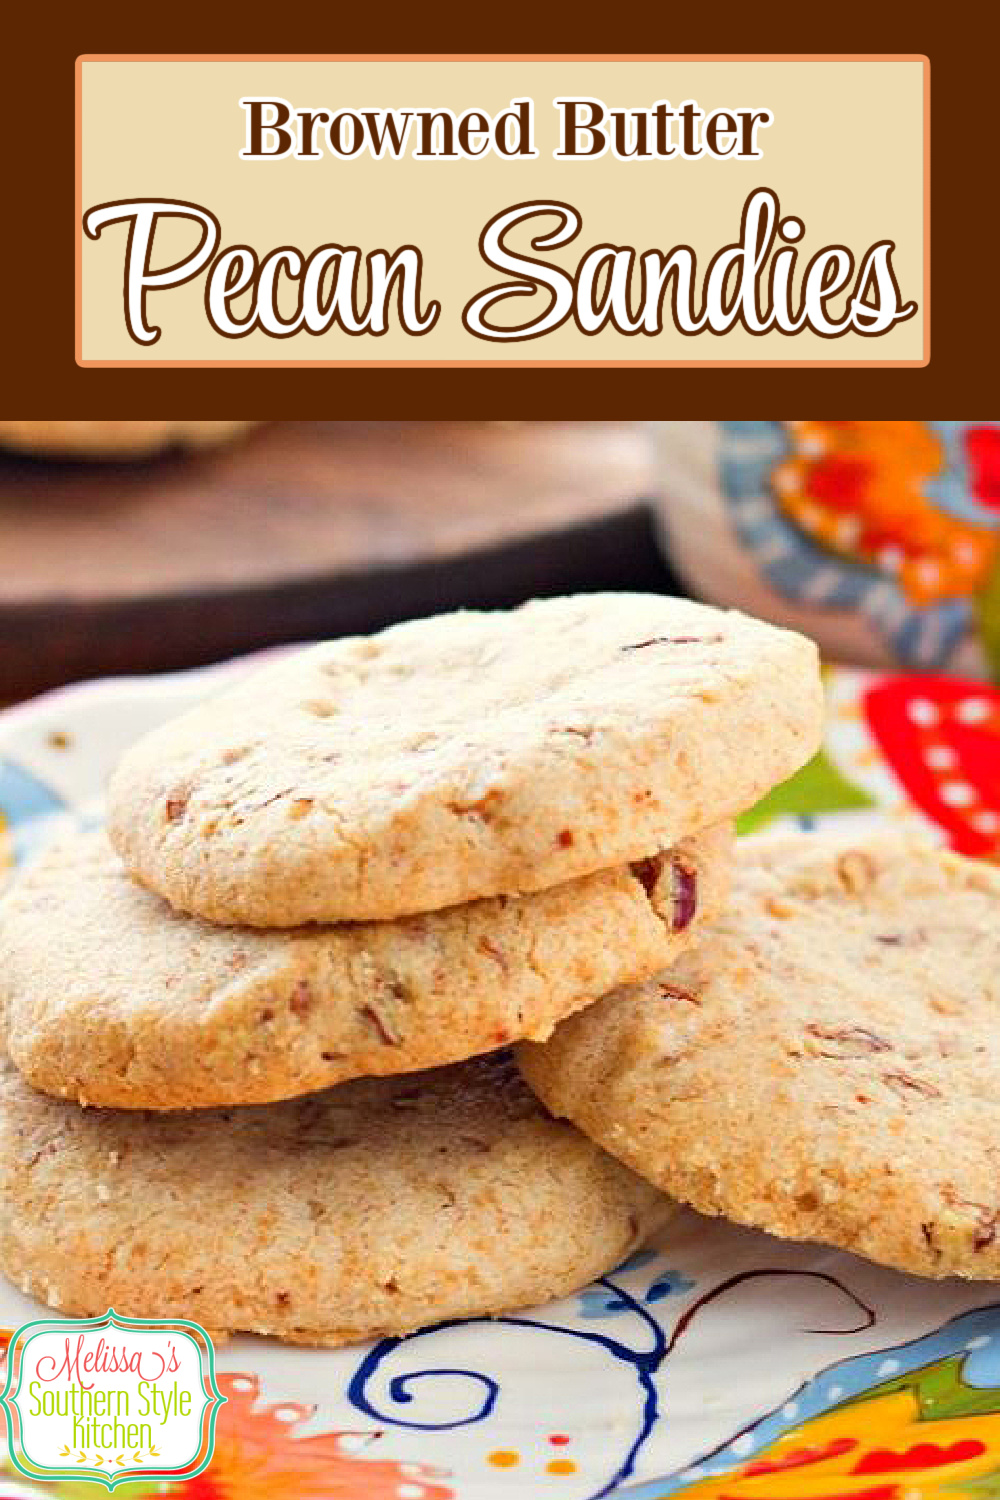 These buttery shortbread cookies are filled with the nutty flavor of browned butter and toasted pecans #pecancookies #pecansandies #shortbreadcookies #cookies #cookierecipes #desserts #dessertfoodrecipes #southernfood #southernrecipes #holidaybaking #christmascookies